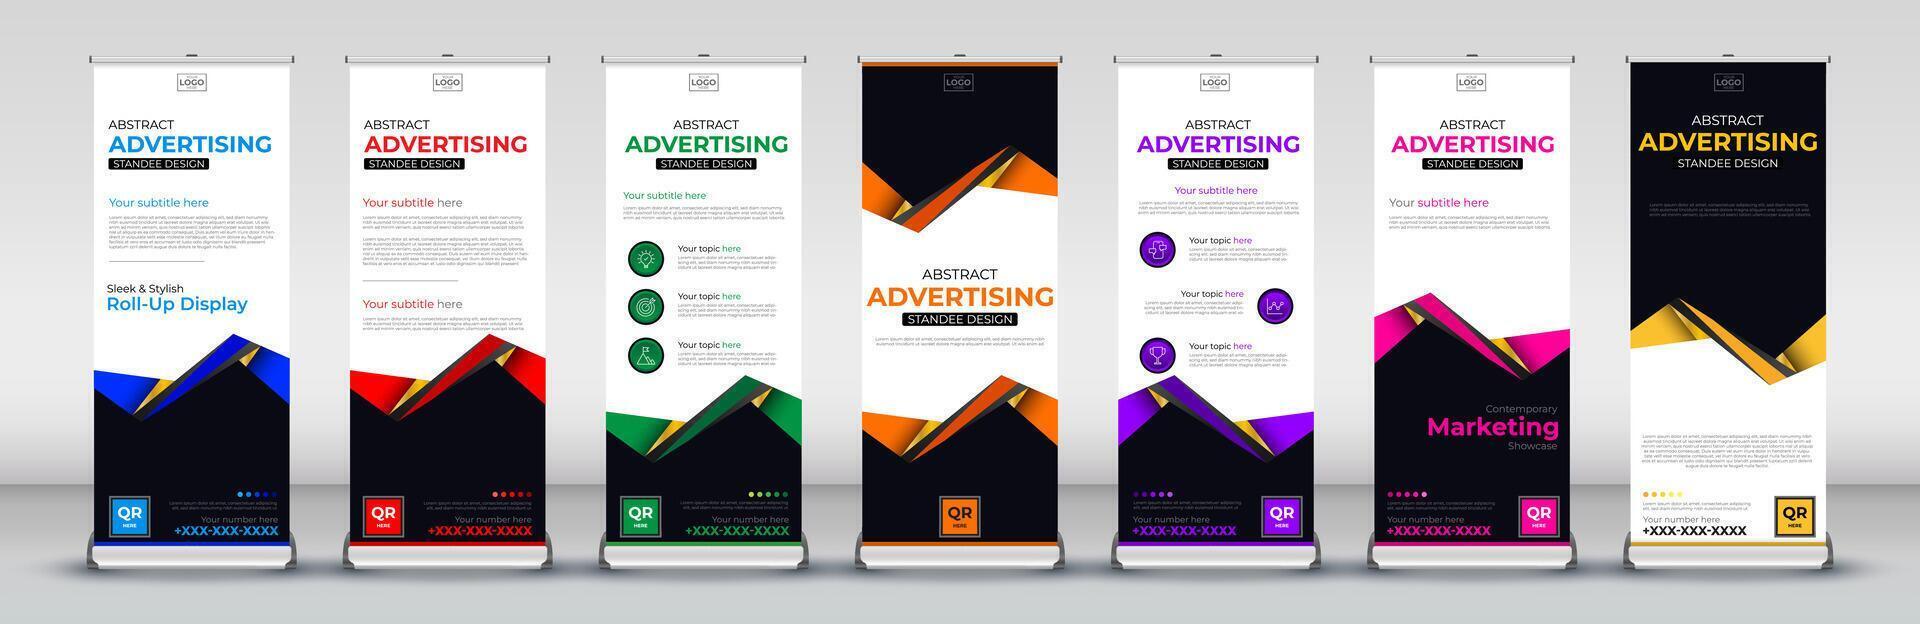 Business abstract roll up banner design for Streets, events, presentations, meetings, annual events, exhibitions in blue, red, green, orange, purple, pink and yellow vector